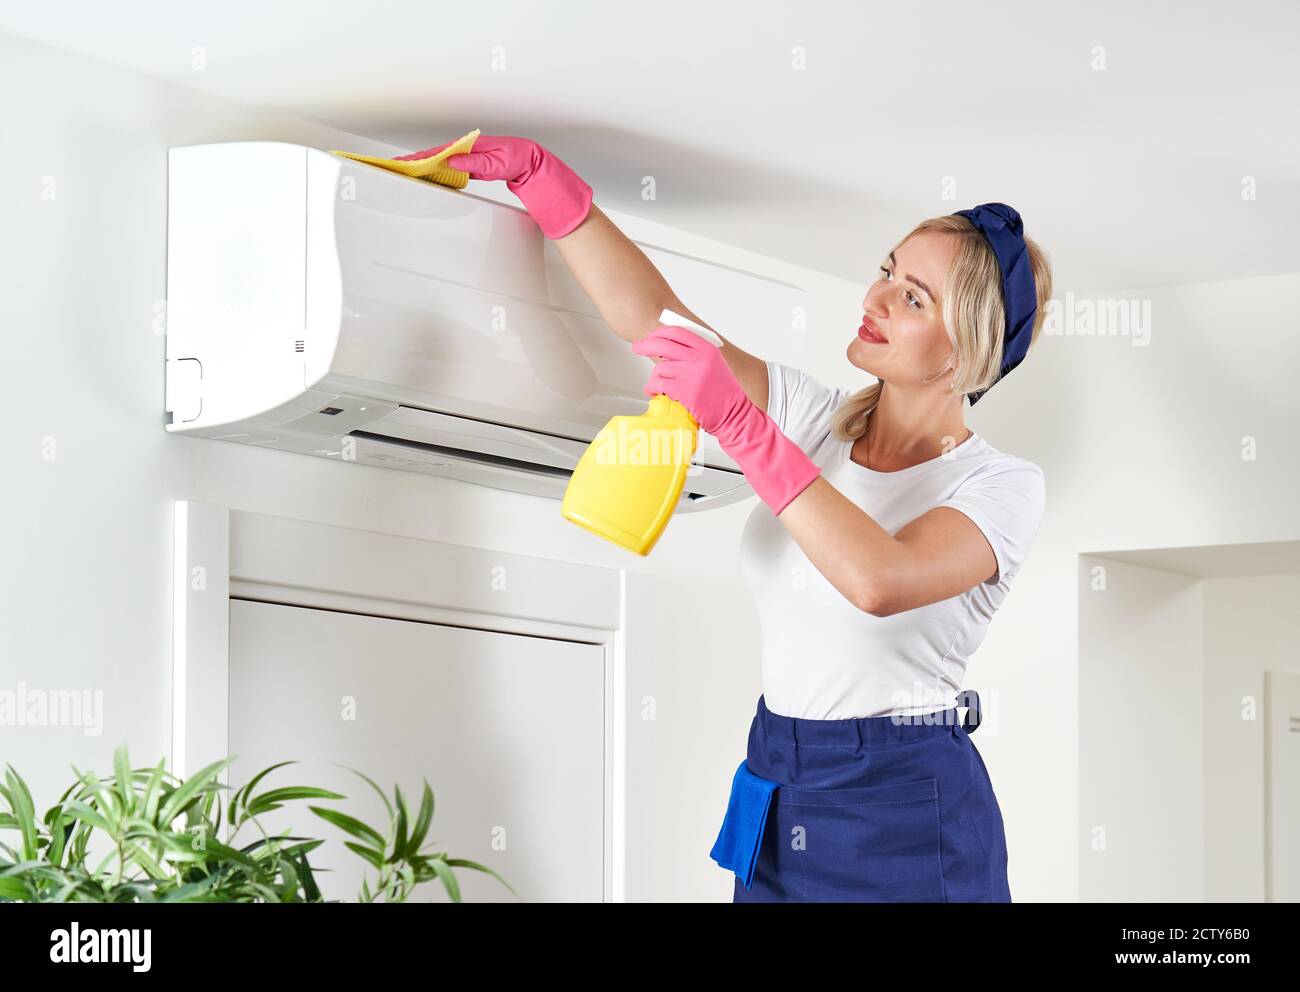 Woman cleaning air conditioner with rag. Cleaning service or housewife concept Stock Photo